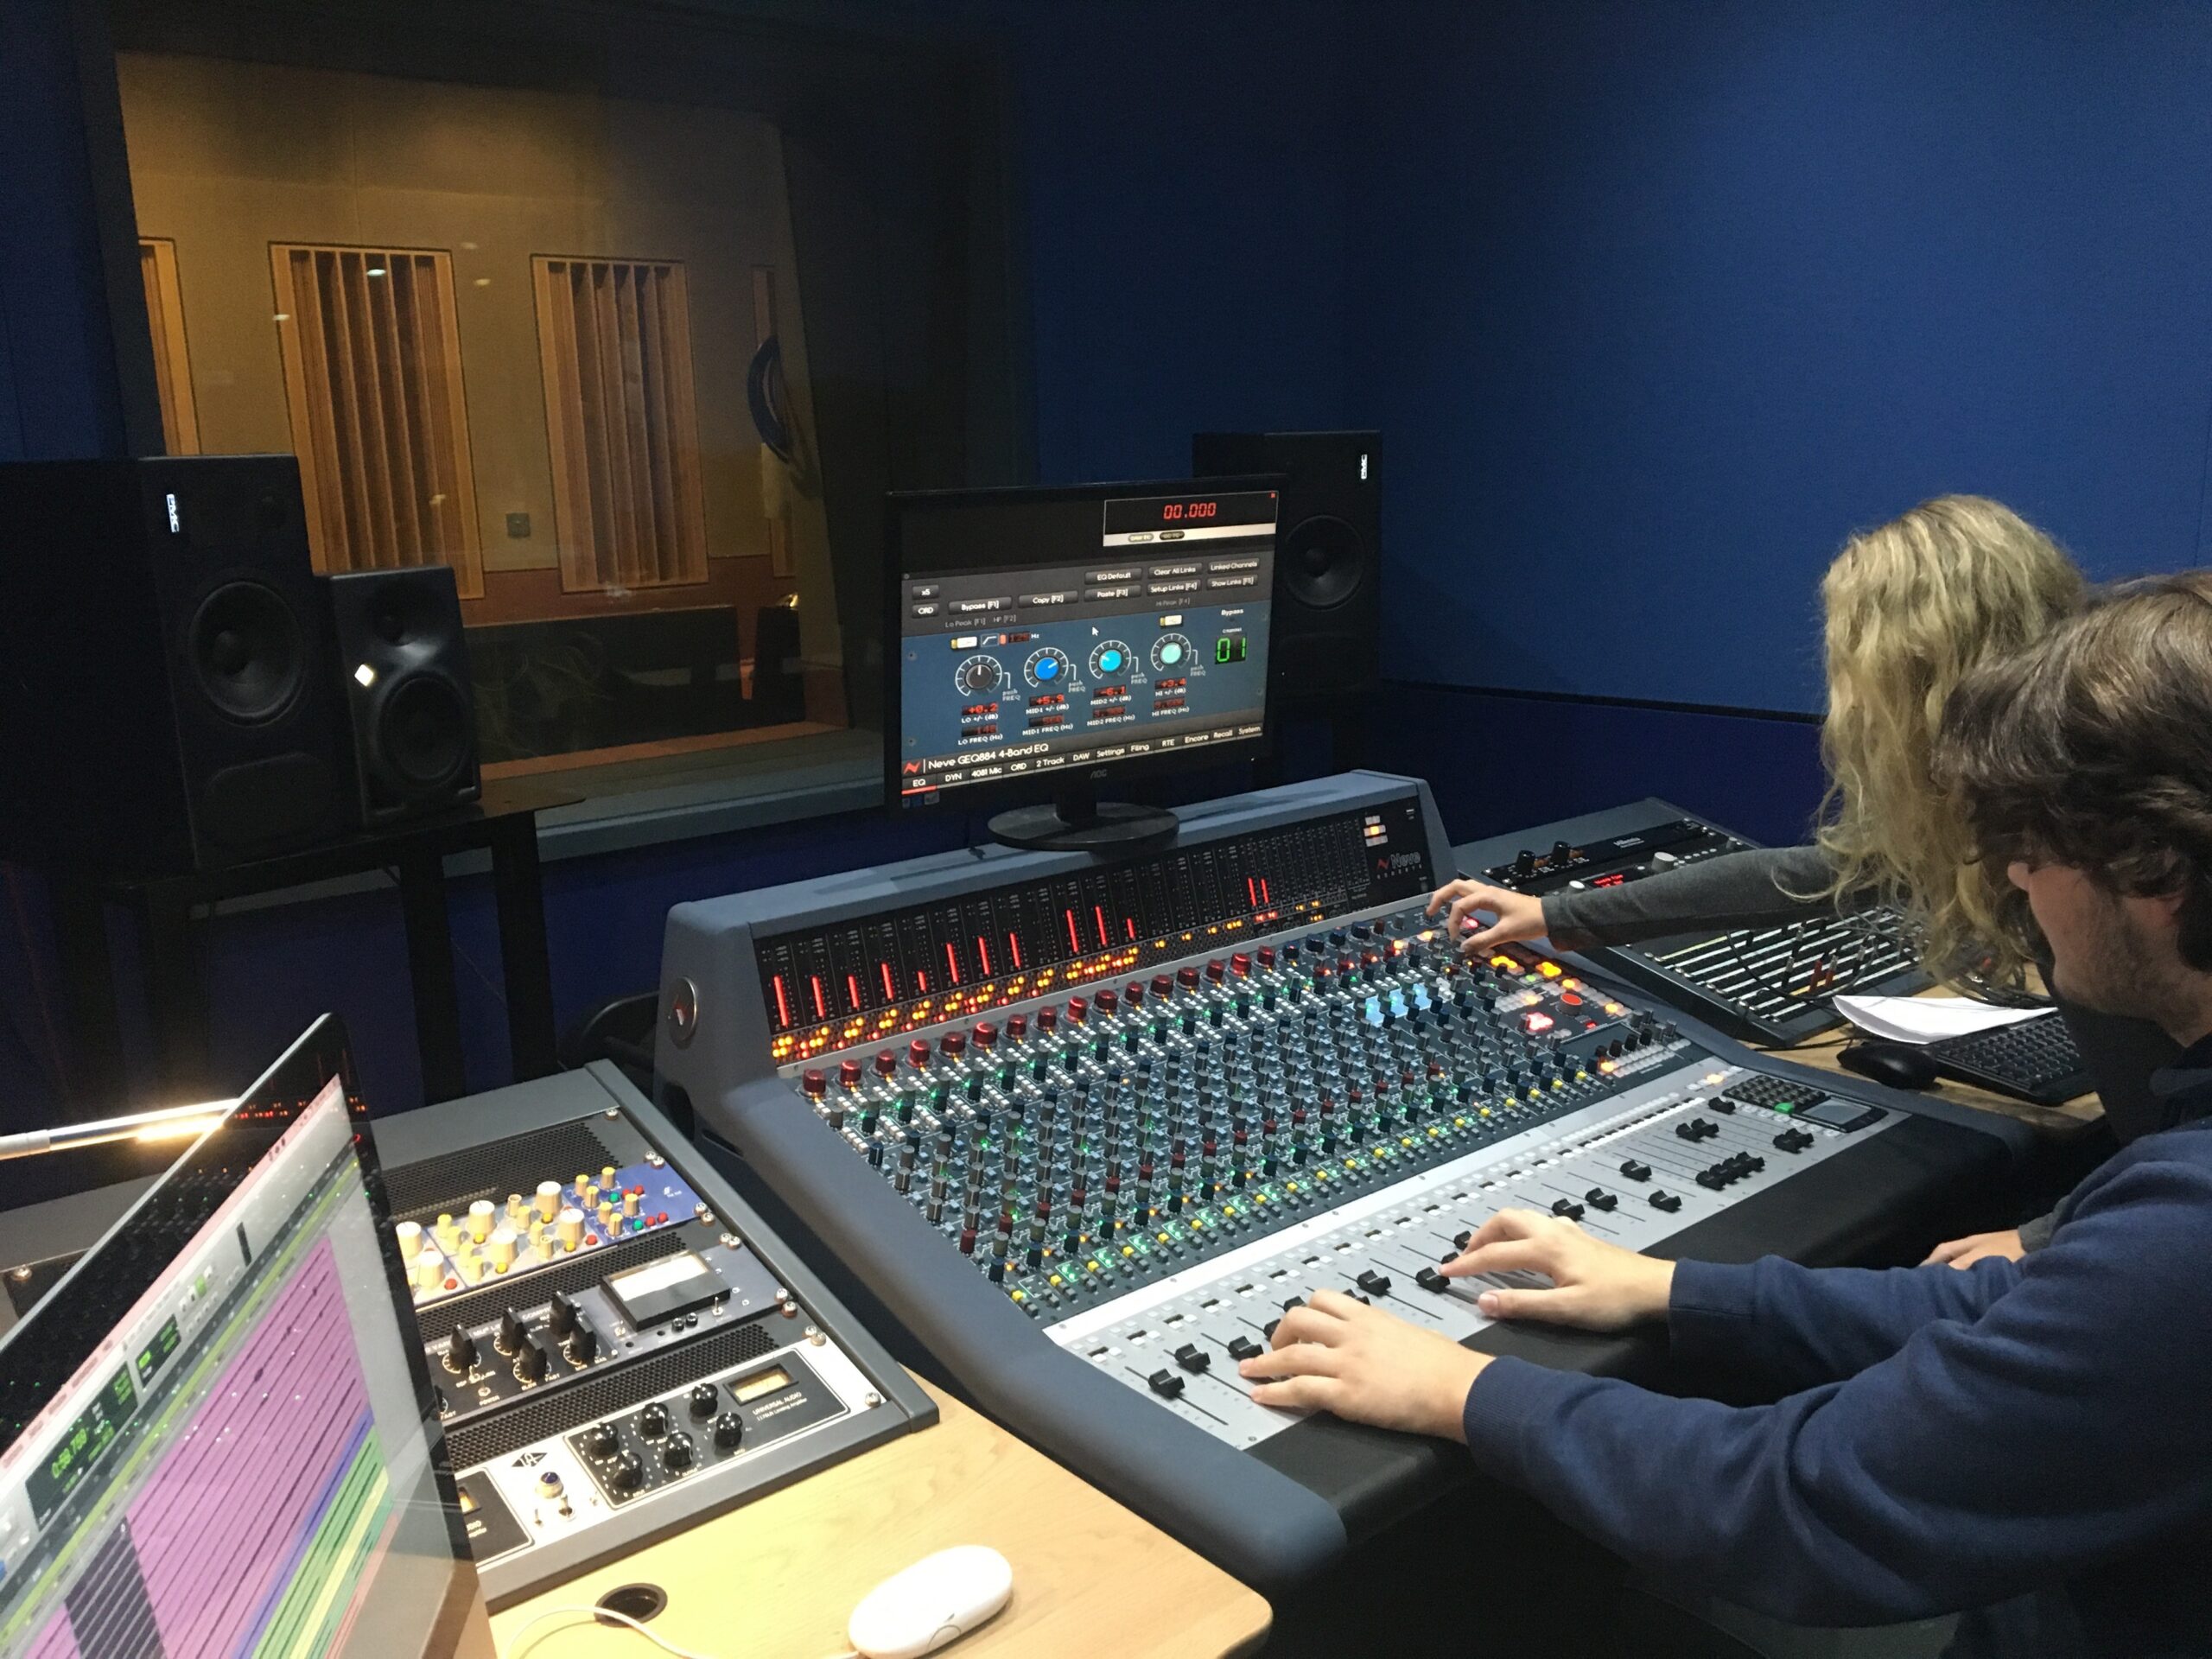 LIPA Installs a Neve Genesys Console as part of its Ongoing Upgrade Plan